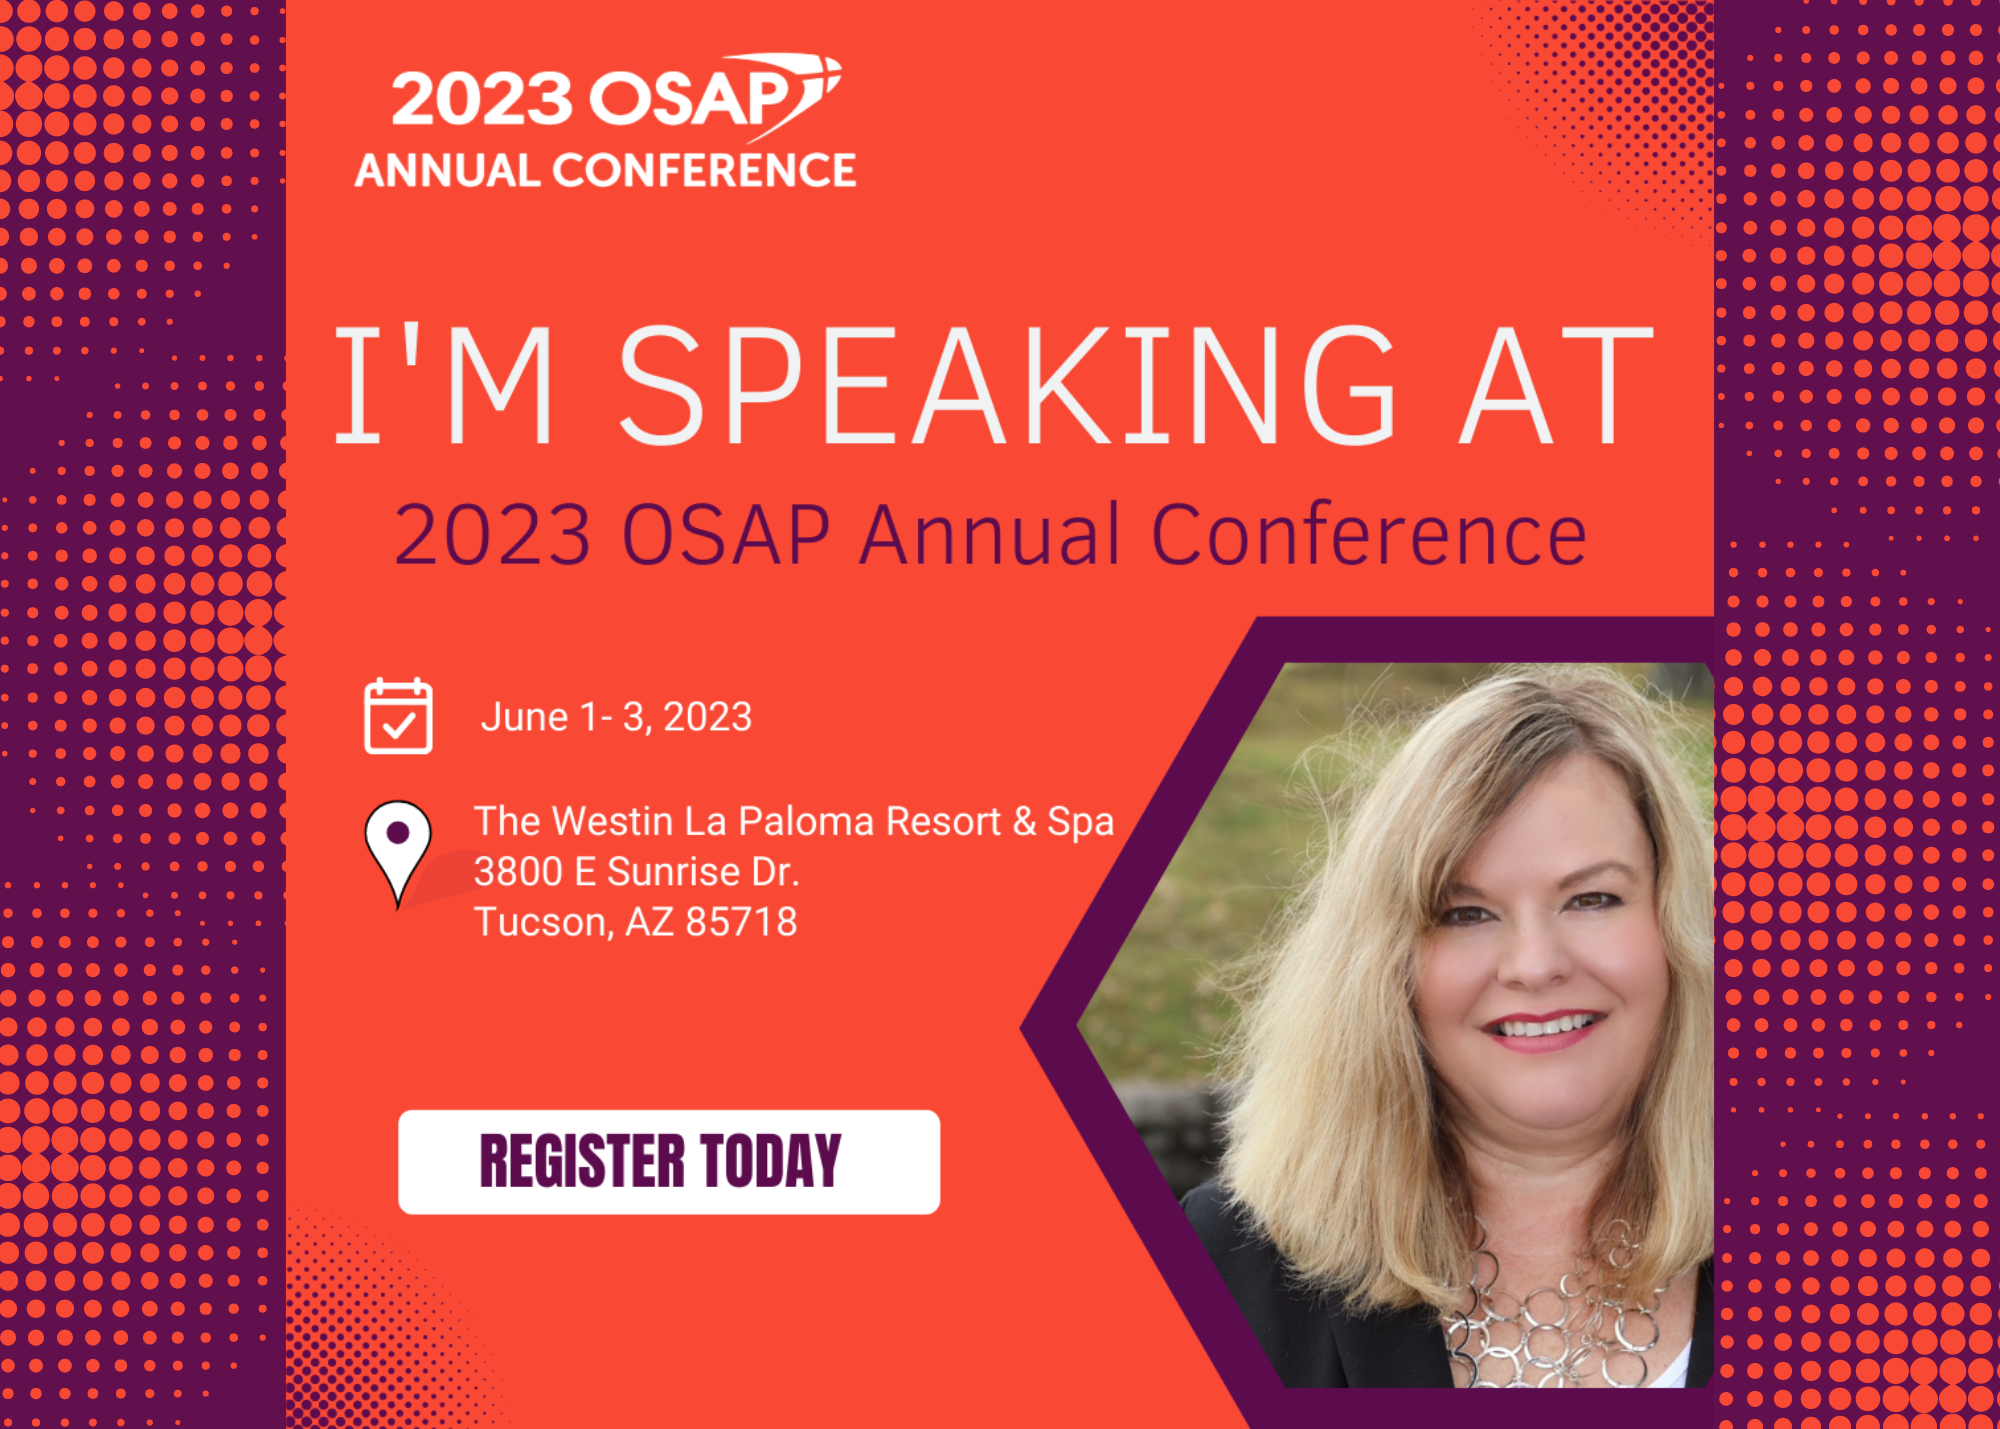 2023 OSAP Annual Conference in Tuscon, AZ Image